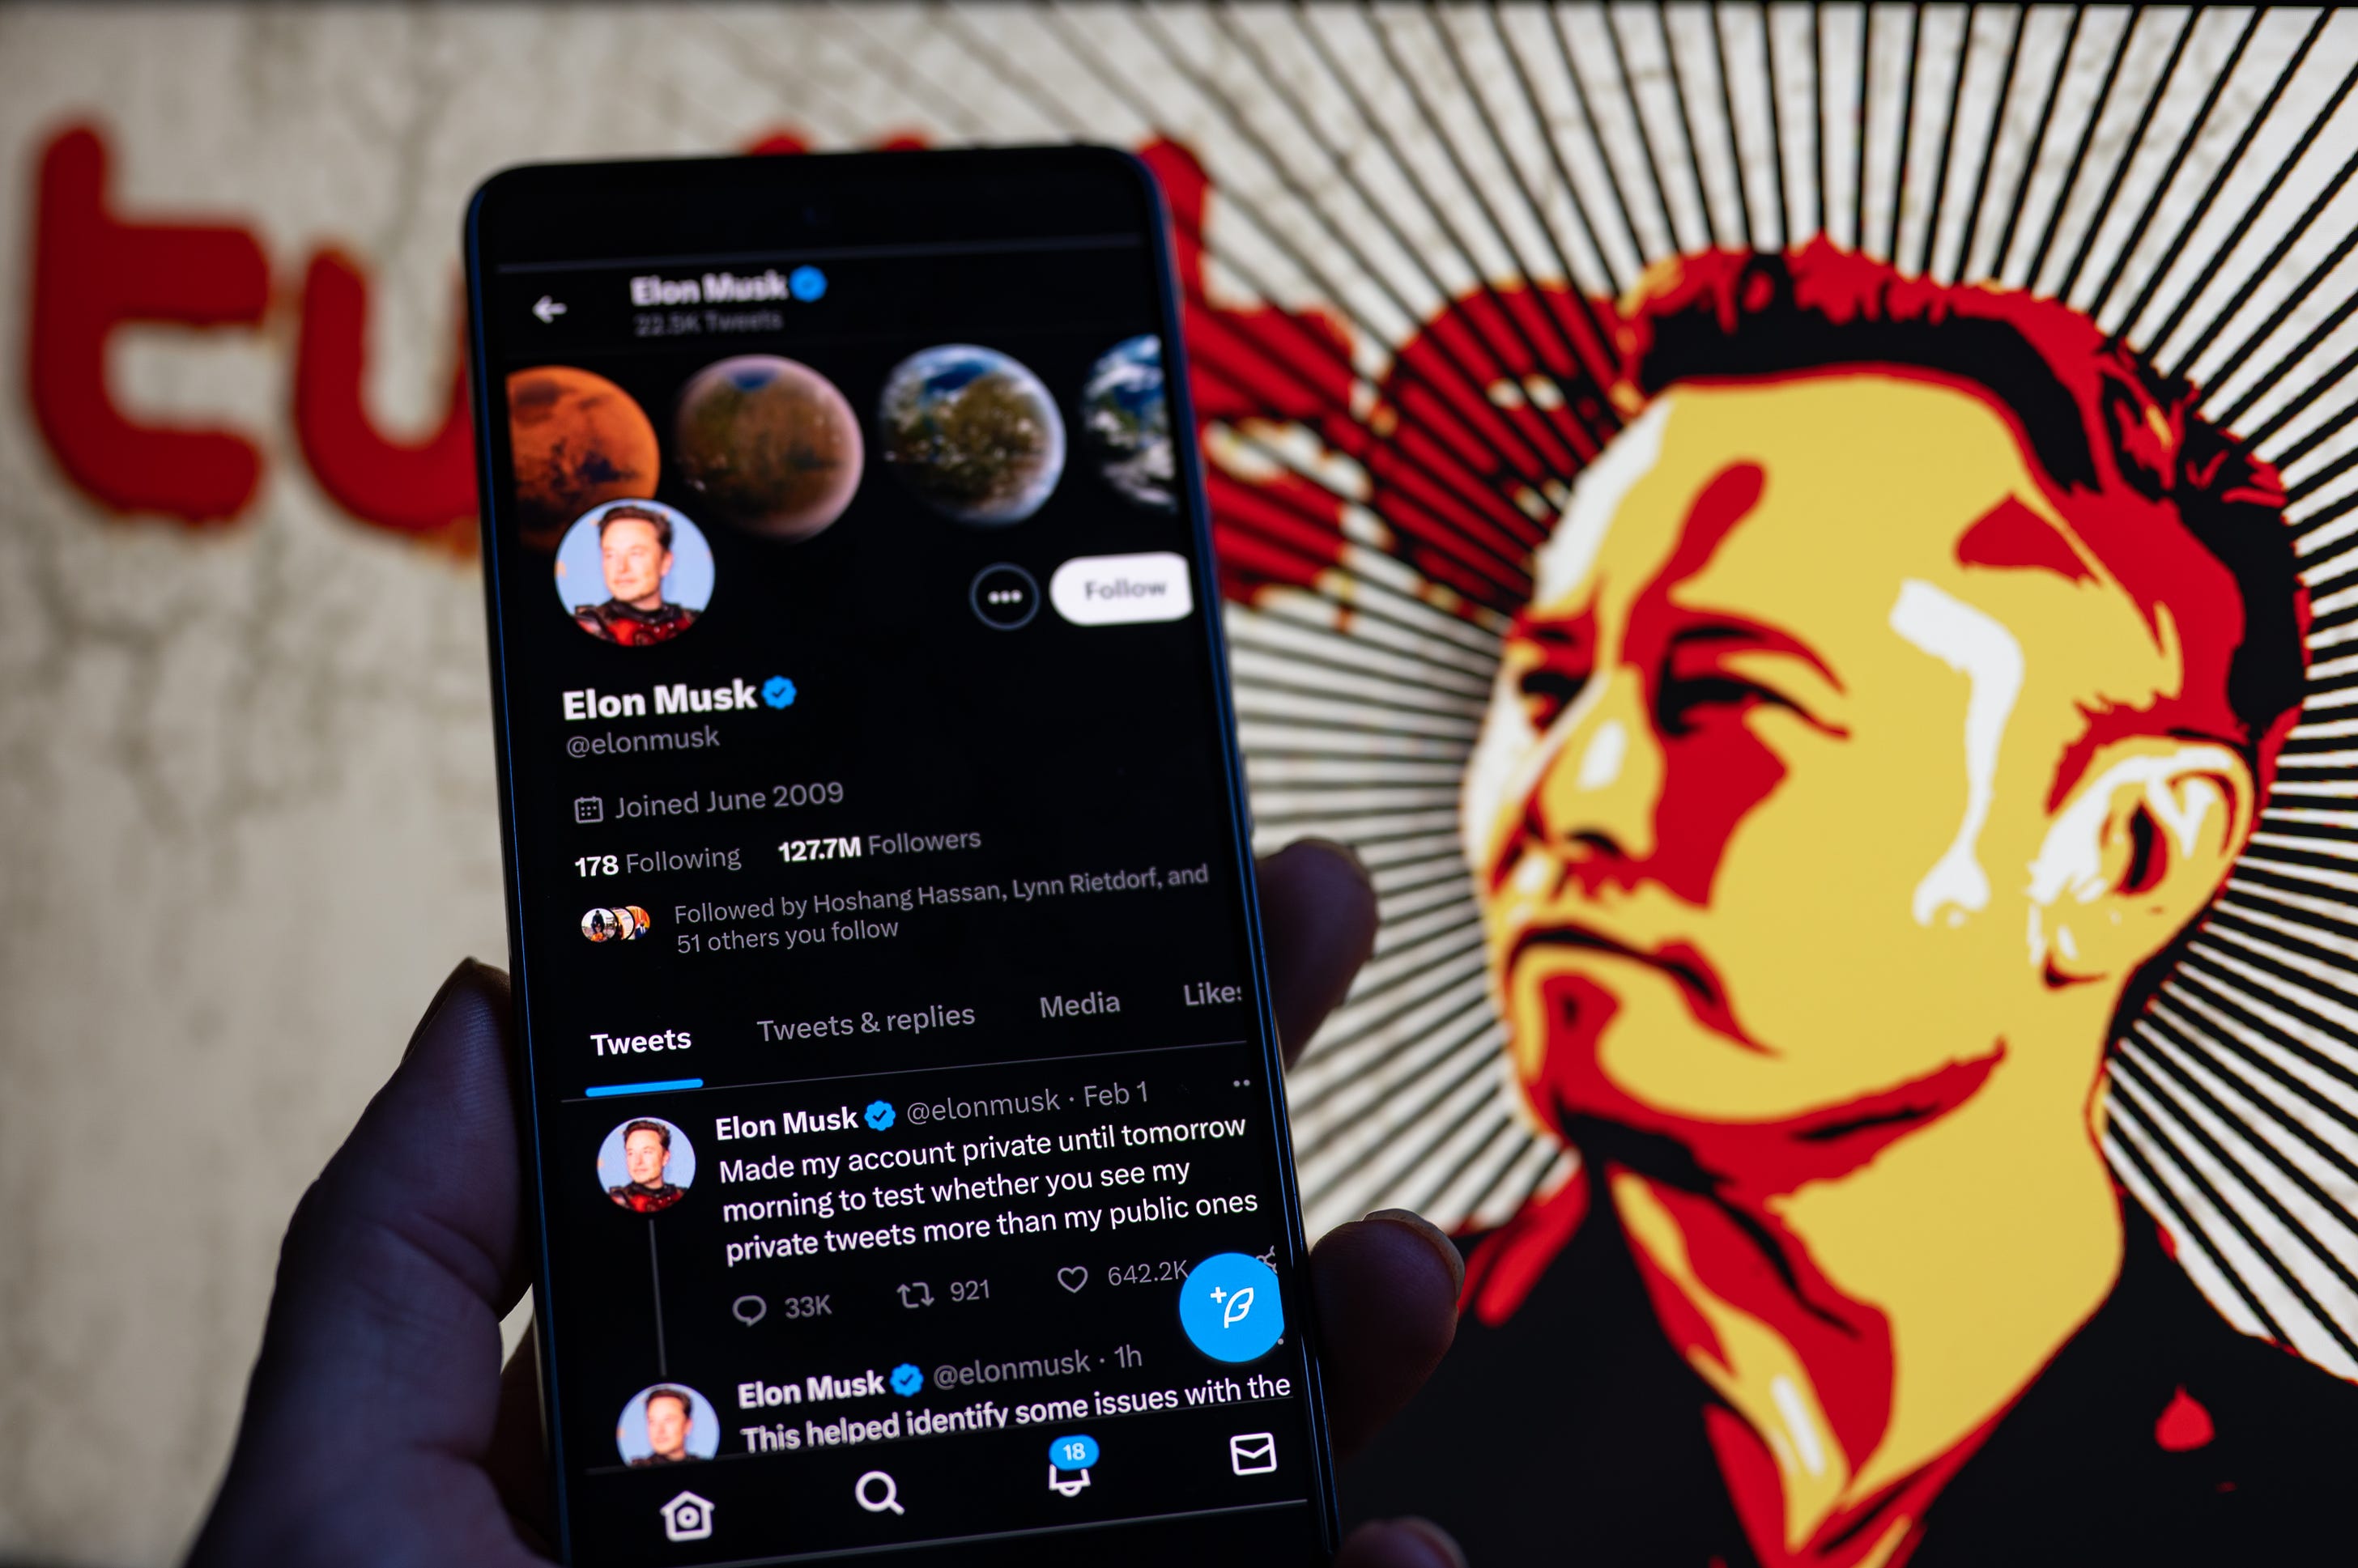 Elon Musk Twitter account private page seen on Mobile with Elon Musk in the background on screen. On 2 February 2023 in Brussels, Belgium. (Photo Illustration by Jonathan Raa/NurPhoto via Getty Images)